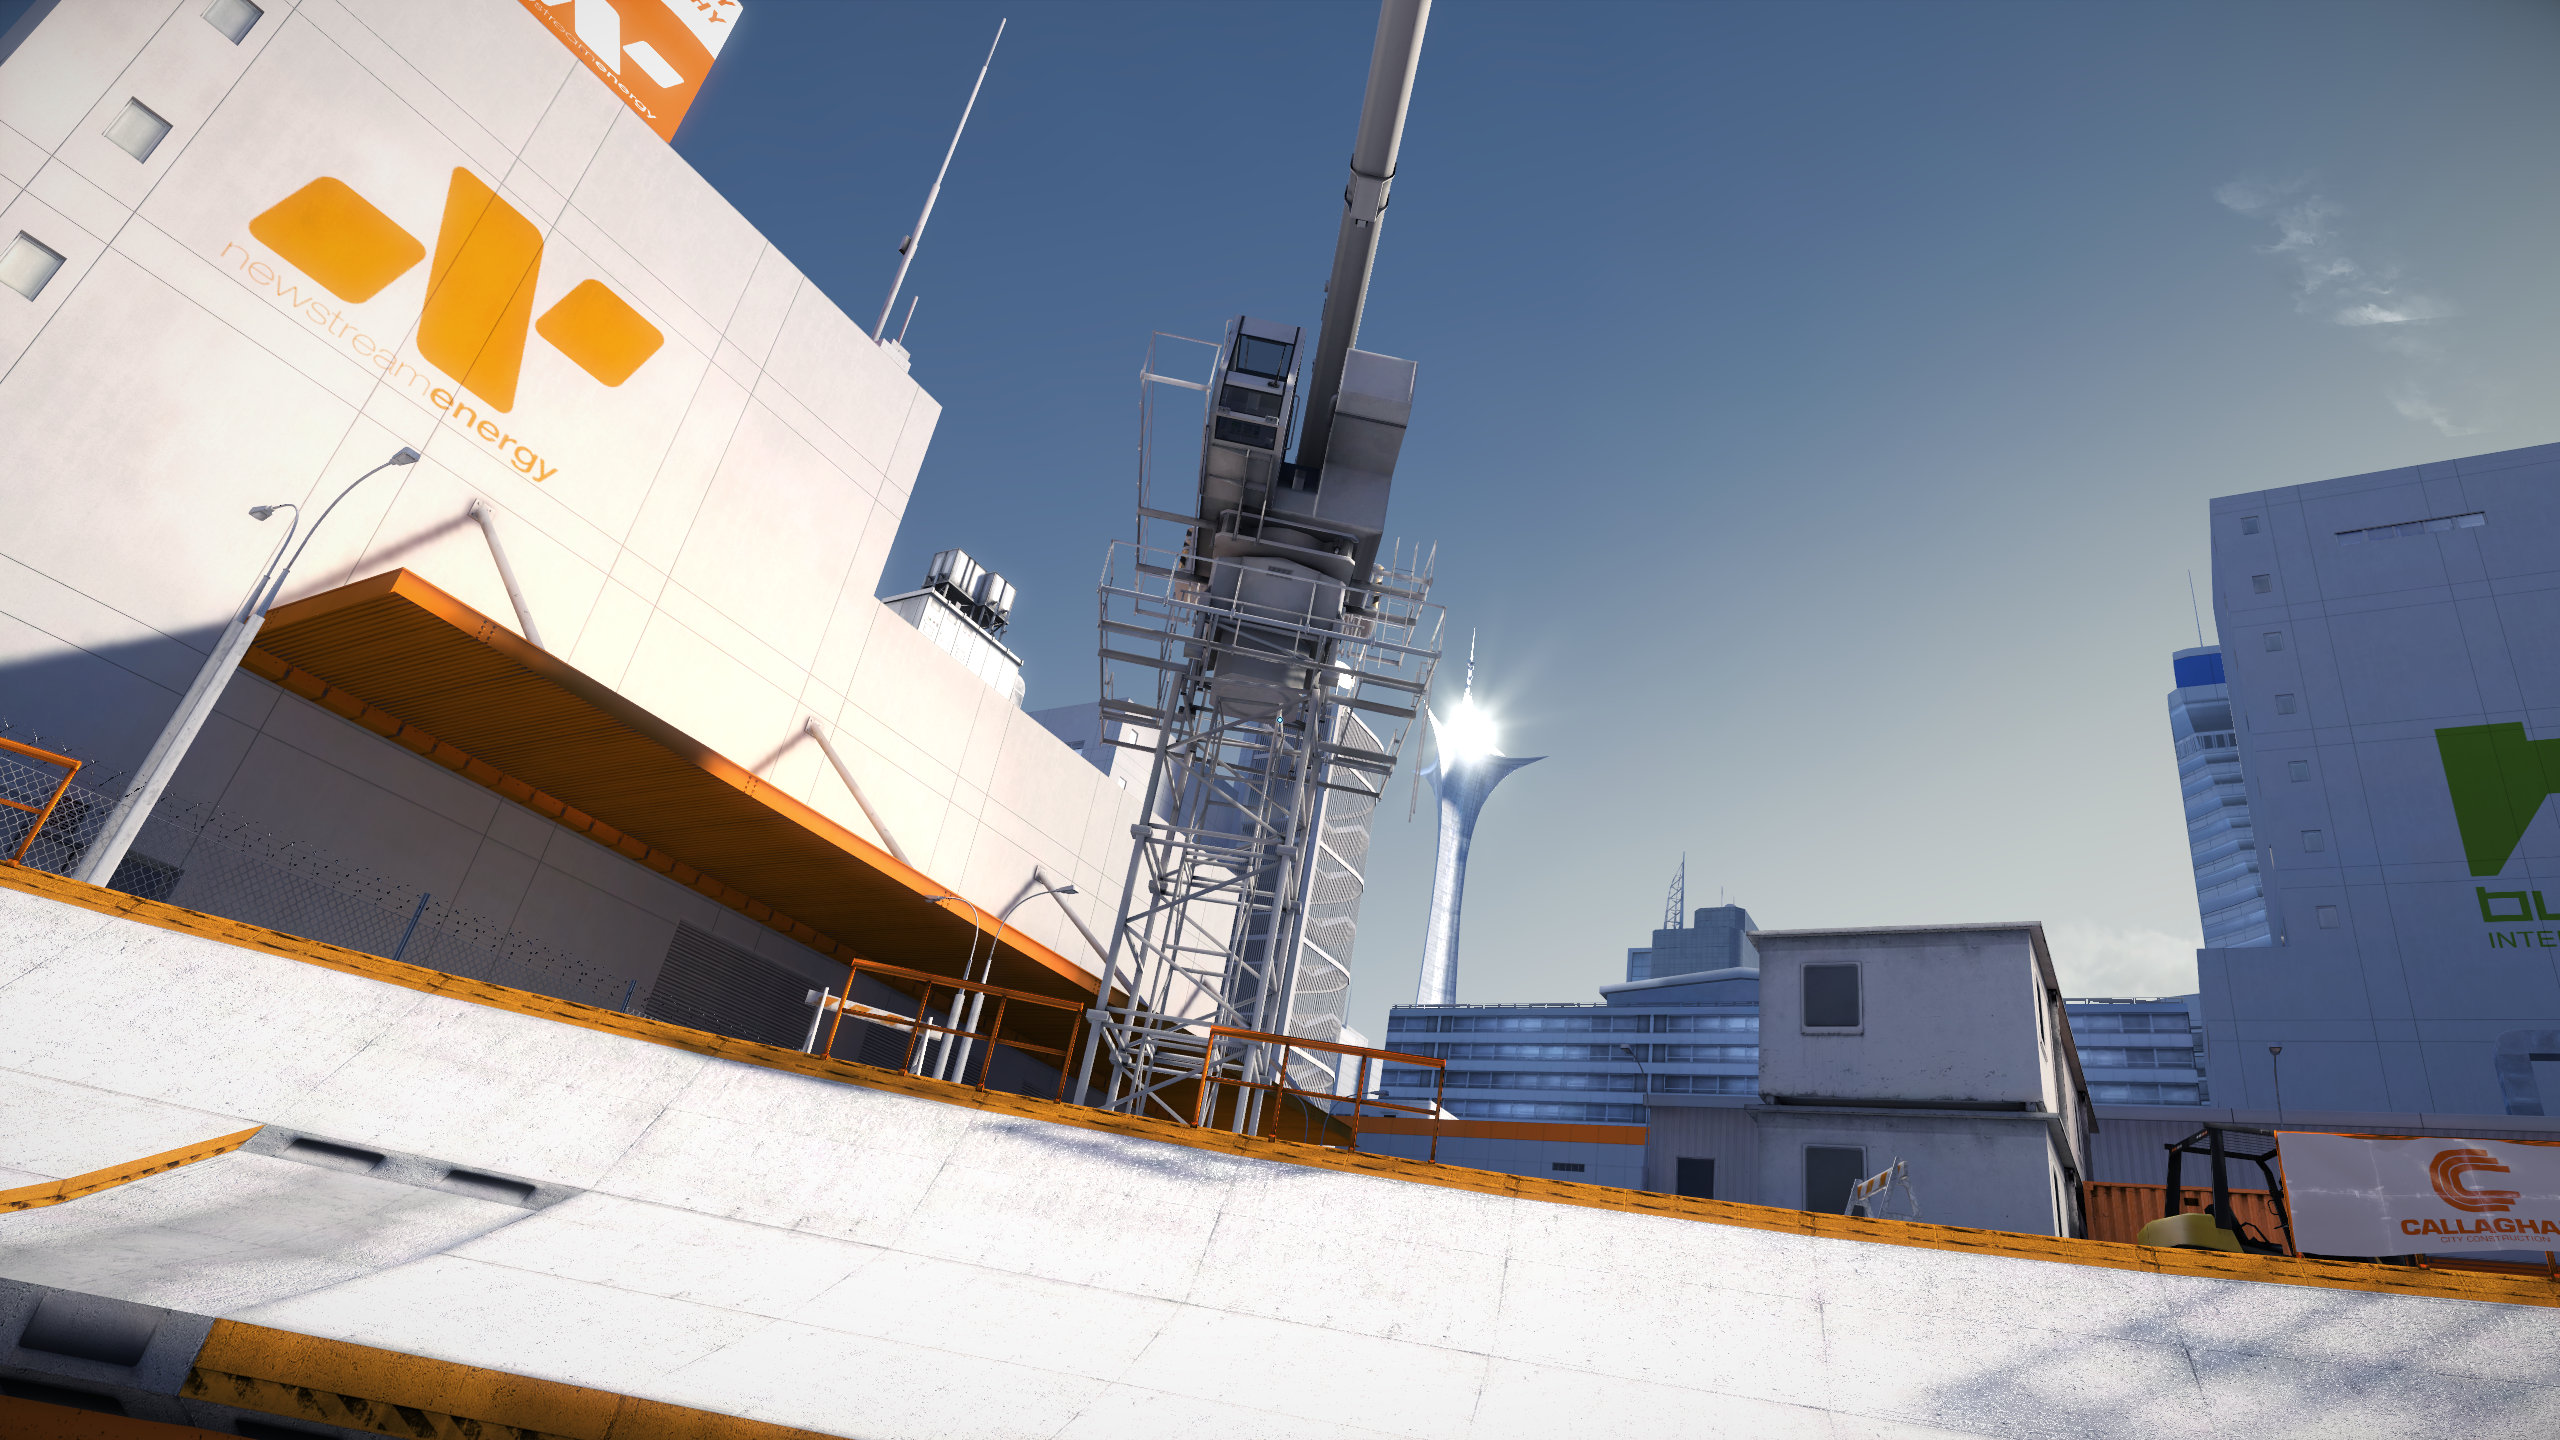 mirrorsedge2013-12-27nbe0h.png